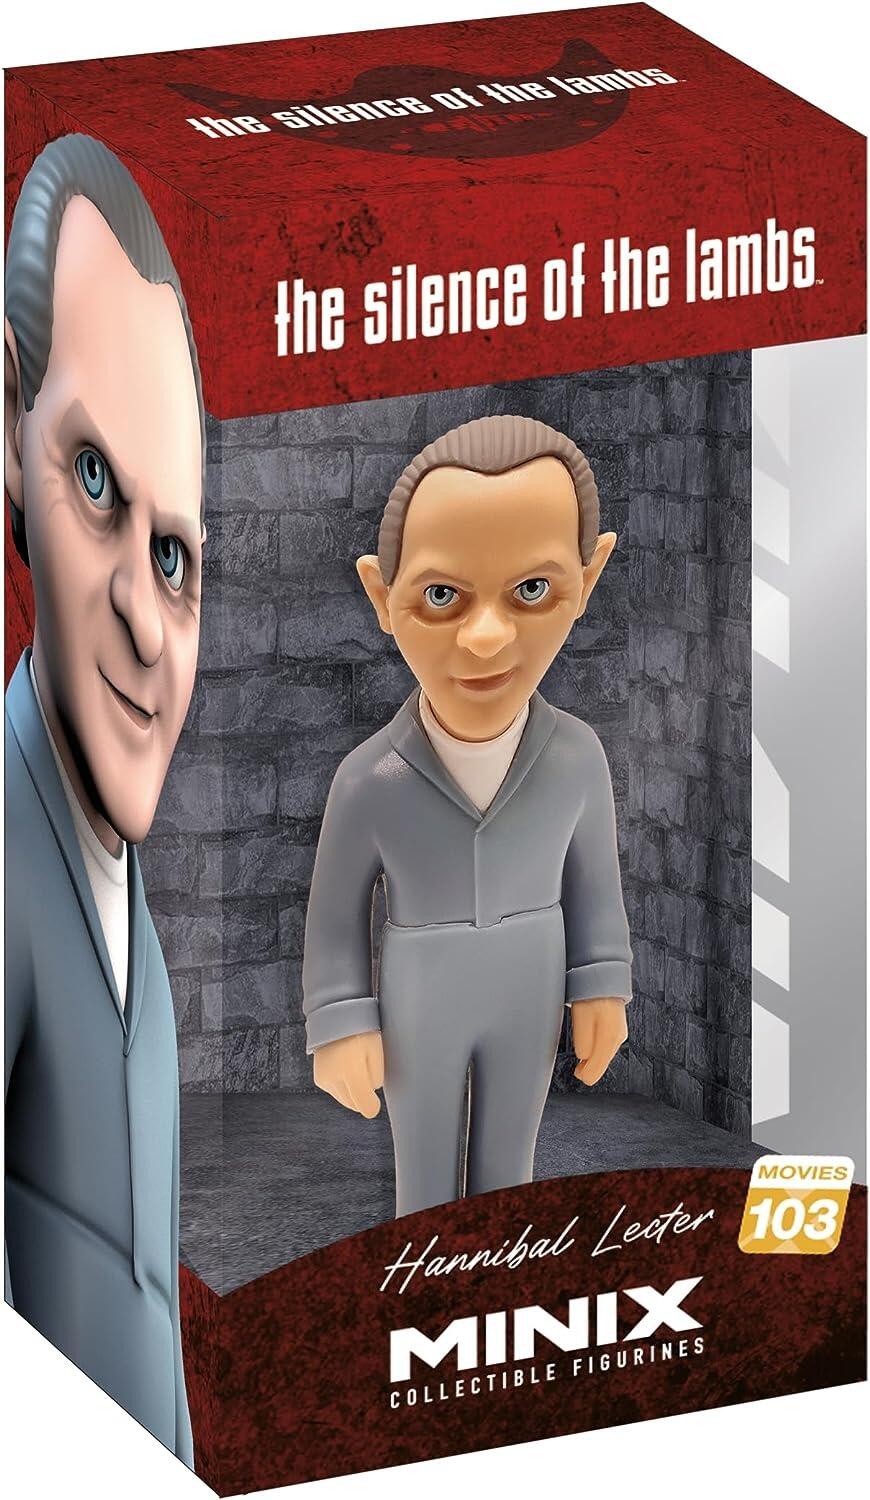 The Silence Of The Lambs Minix 5 Inch Collectible Figurine - Hannibal  Lecter (Anthony Hopkins)